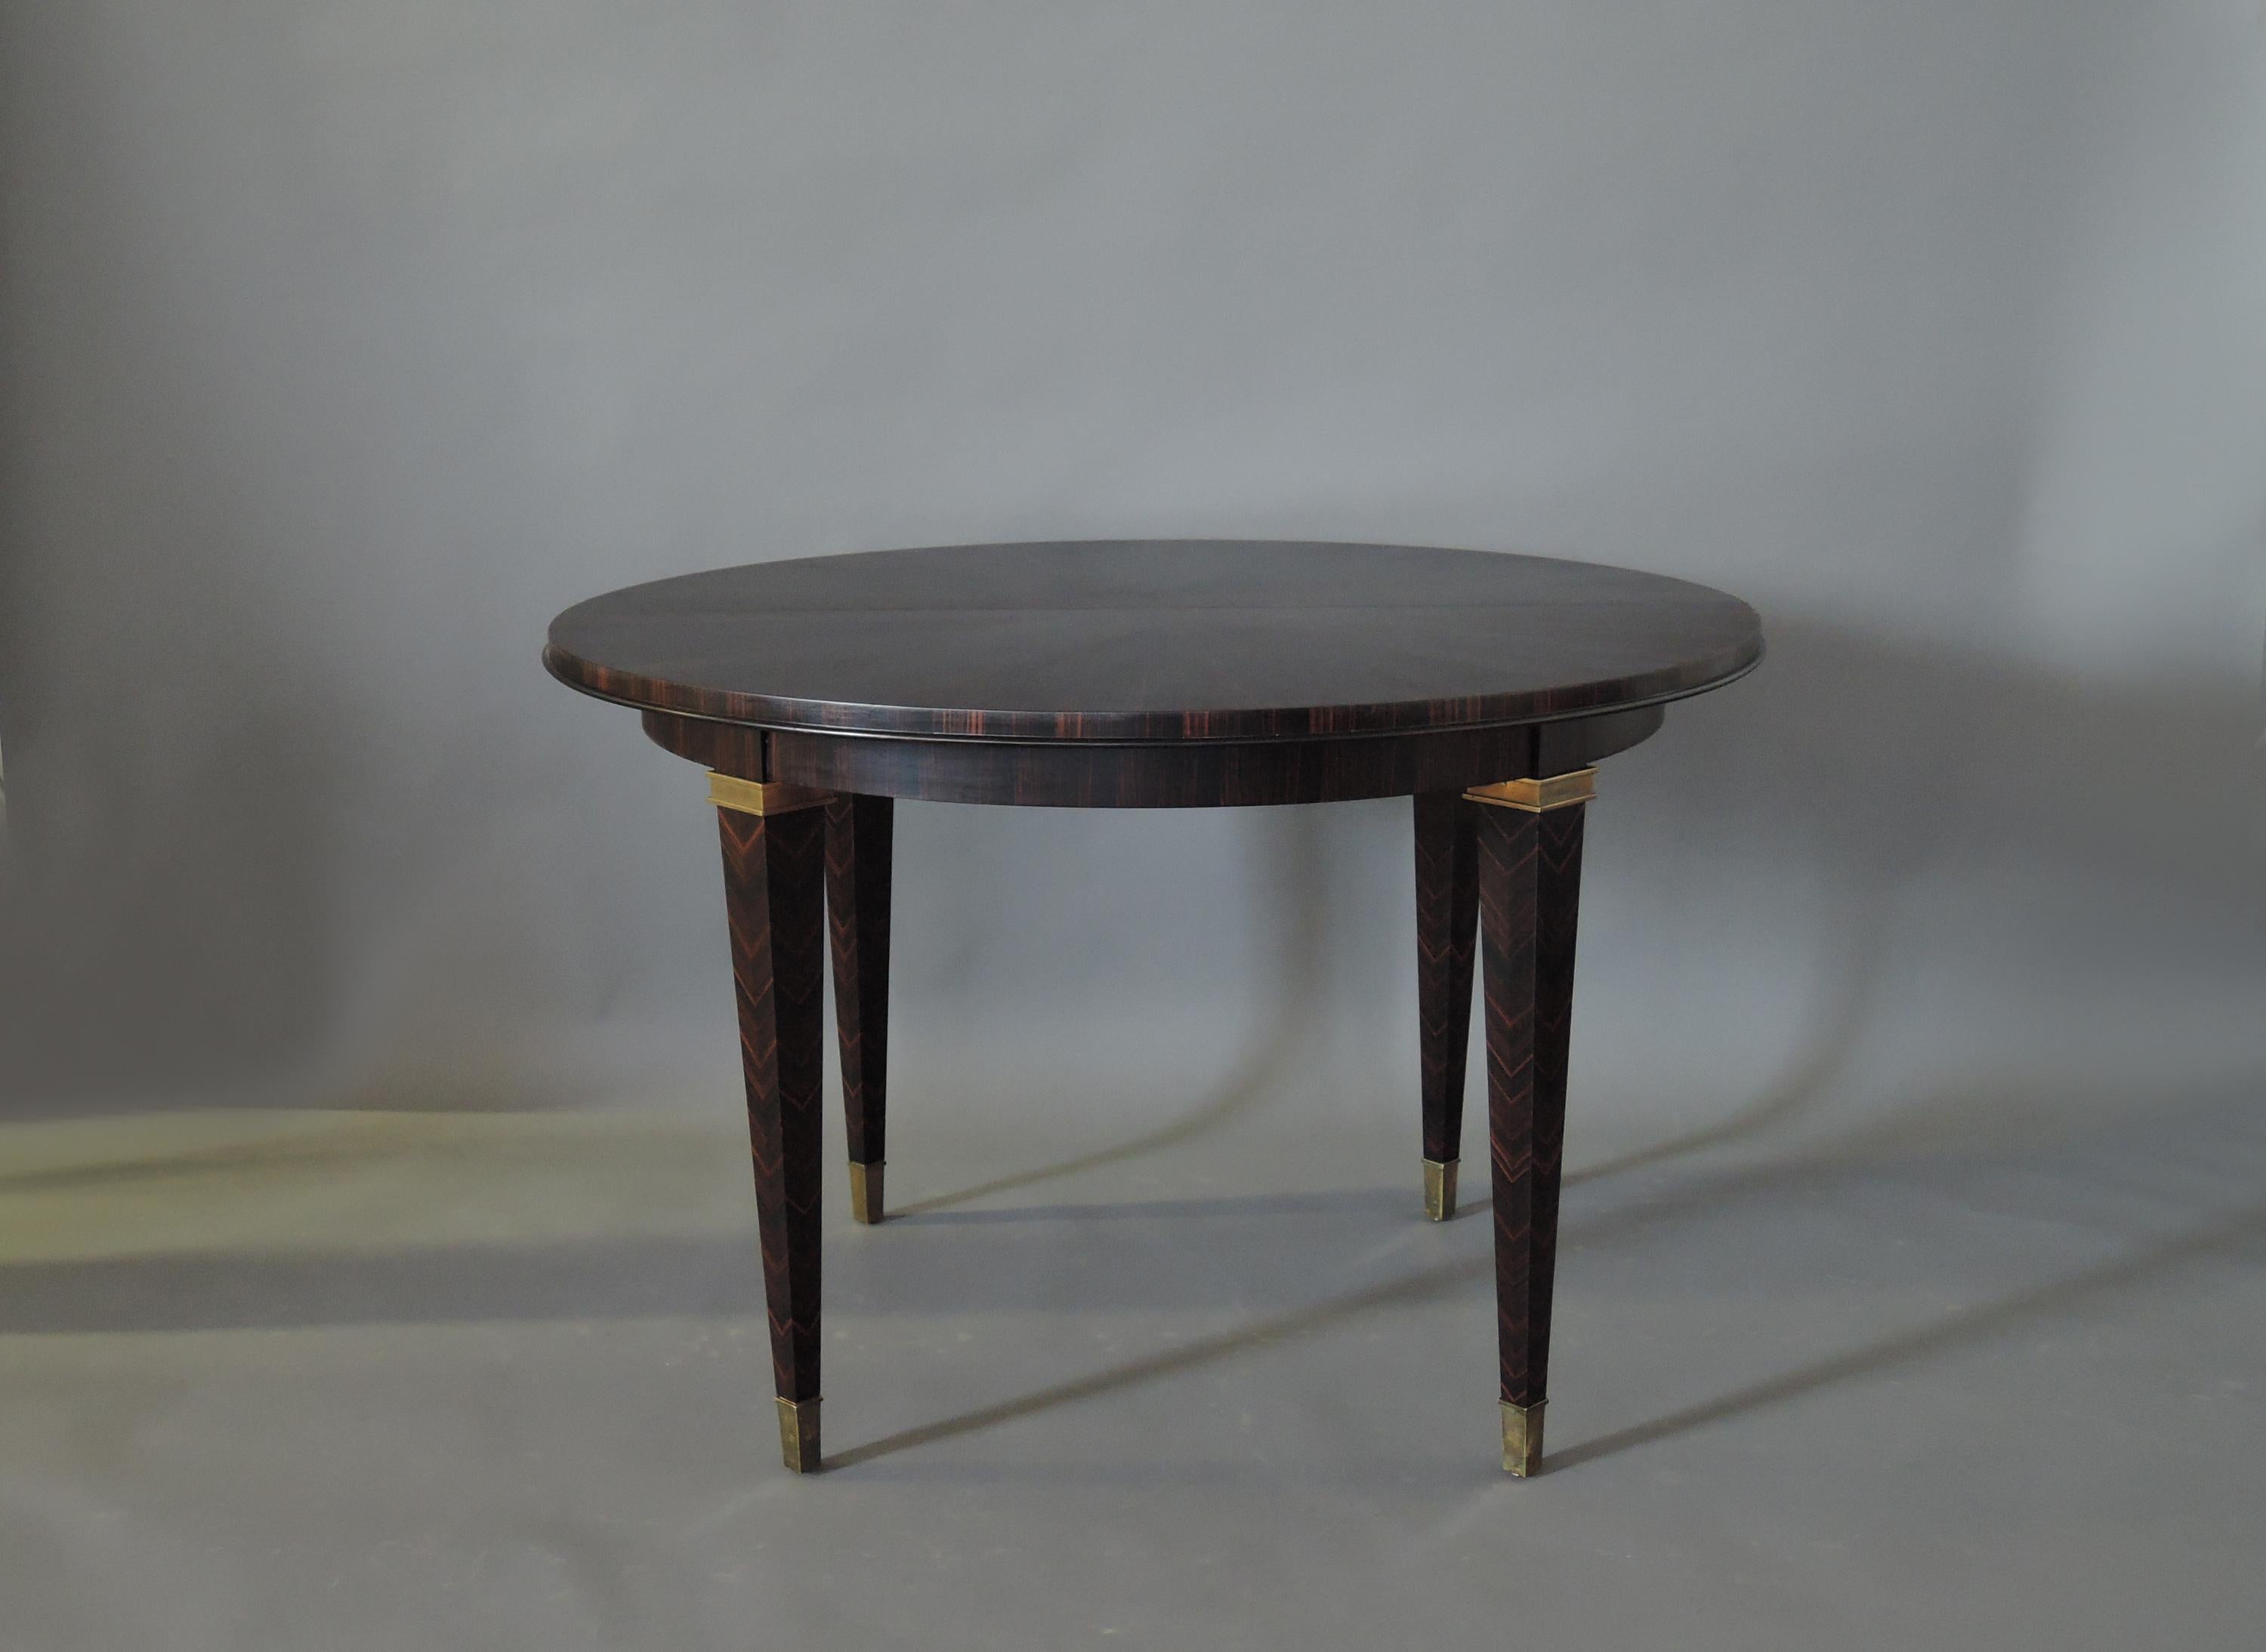 Fine French Art Deco Extendable Macassar Ebony Round Table by Dominique 1